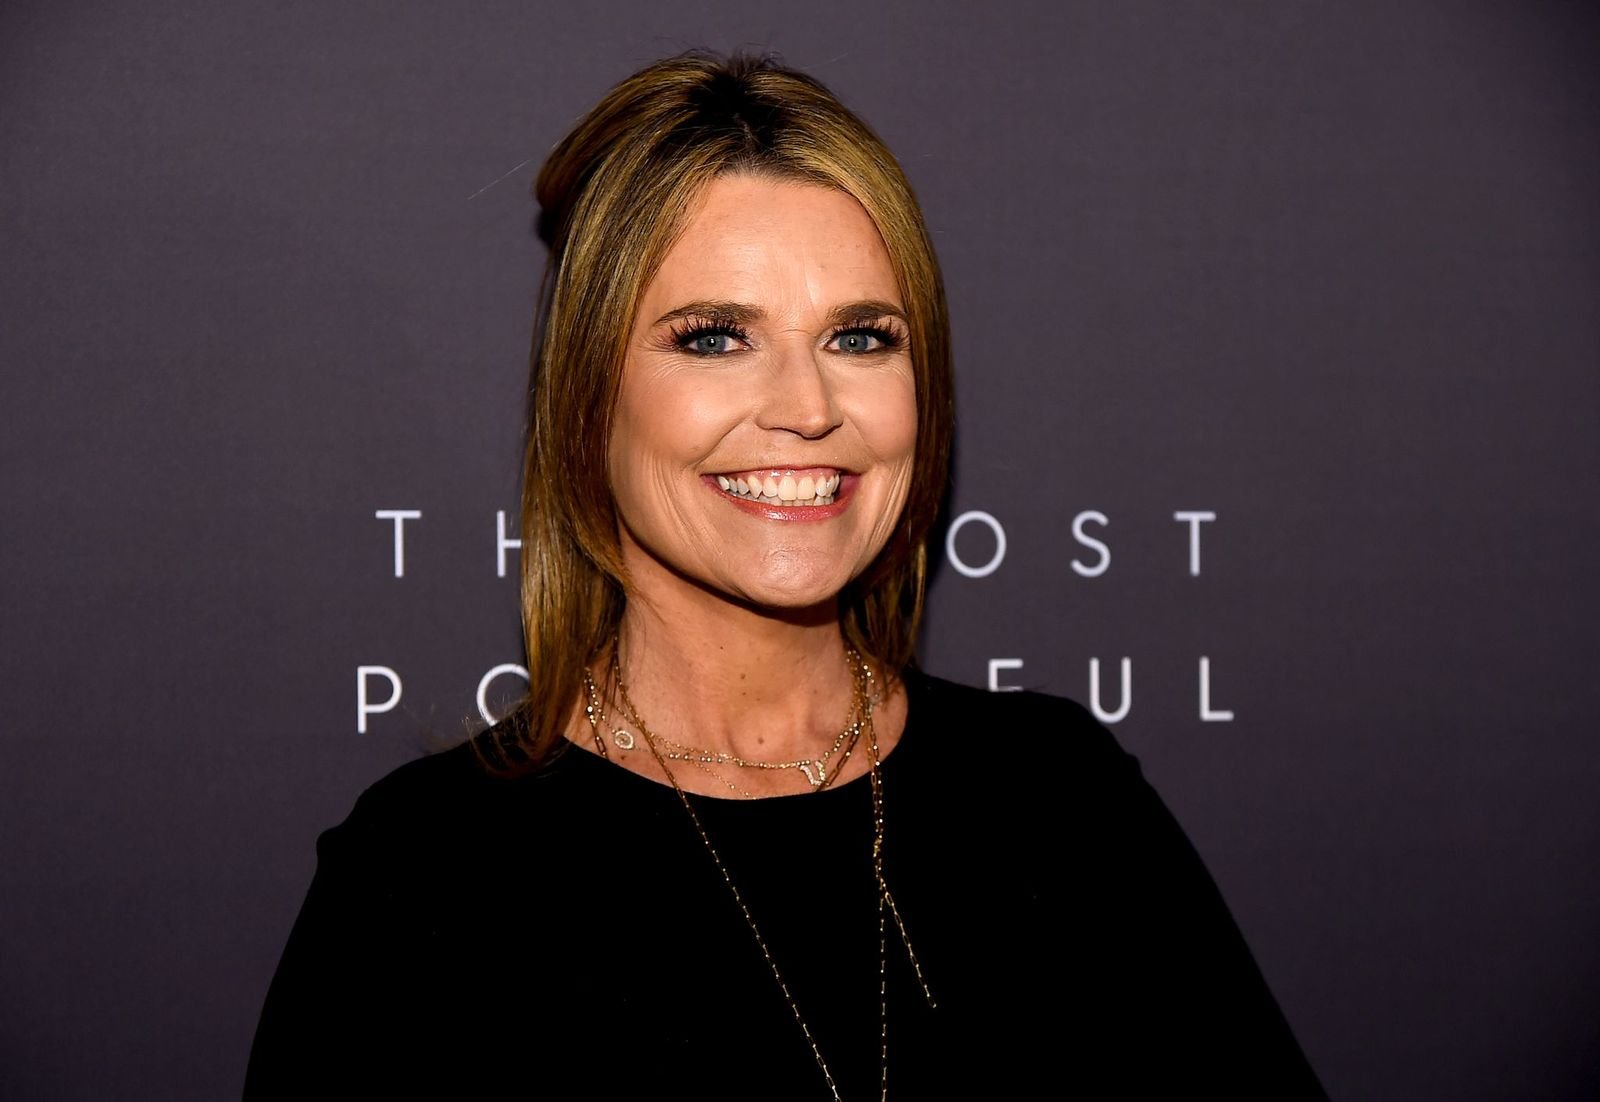 Savannah Guthrie at the Hollywood Reporter's 9th Annual Most Powerful People In Media at The Pool on April 11, 2019 | Photo: Getty Images